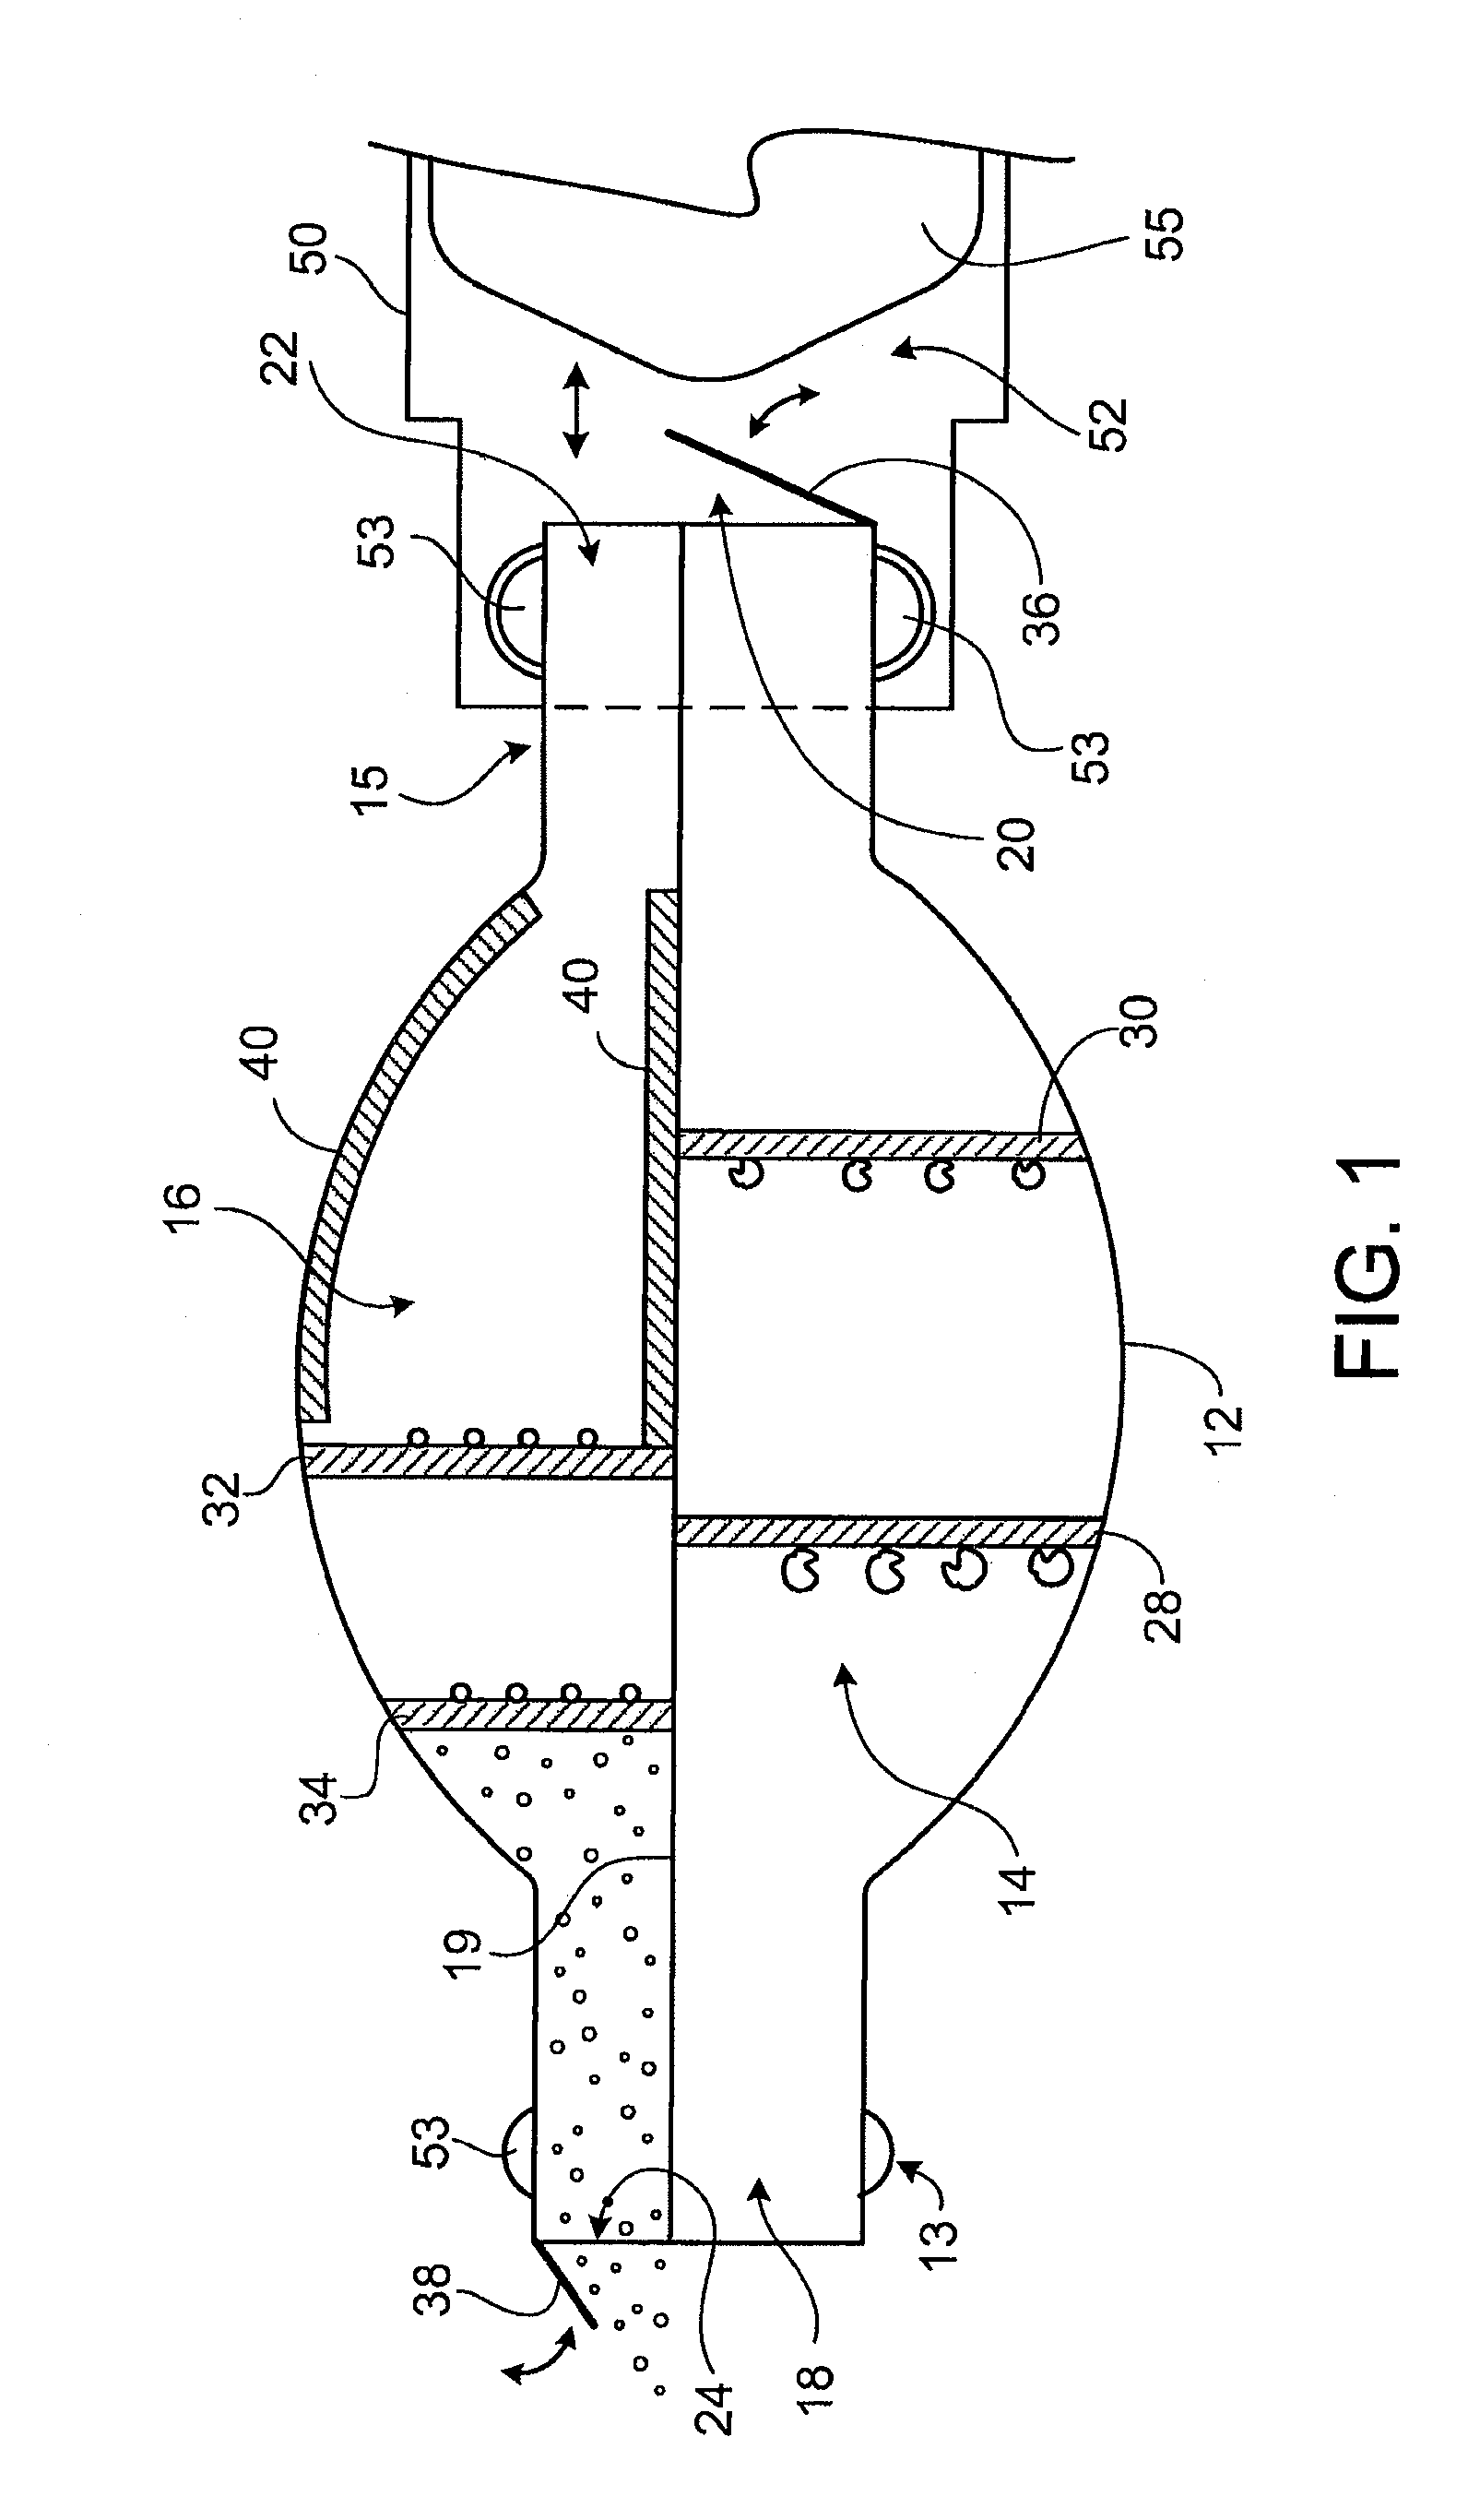 Sample preparation device and method